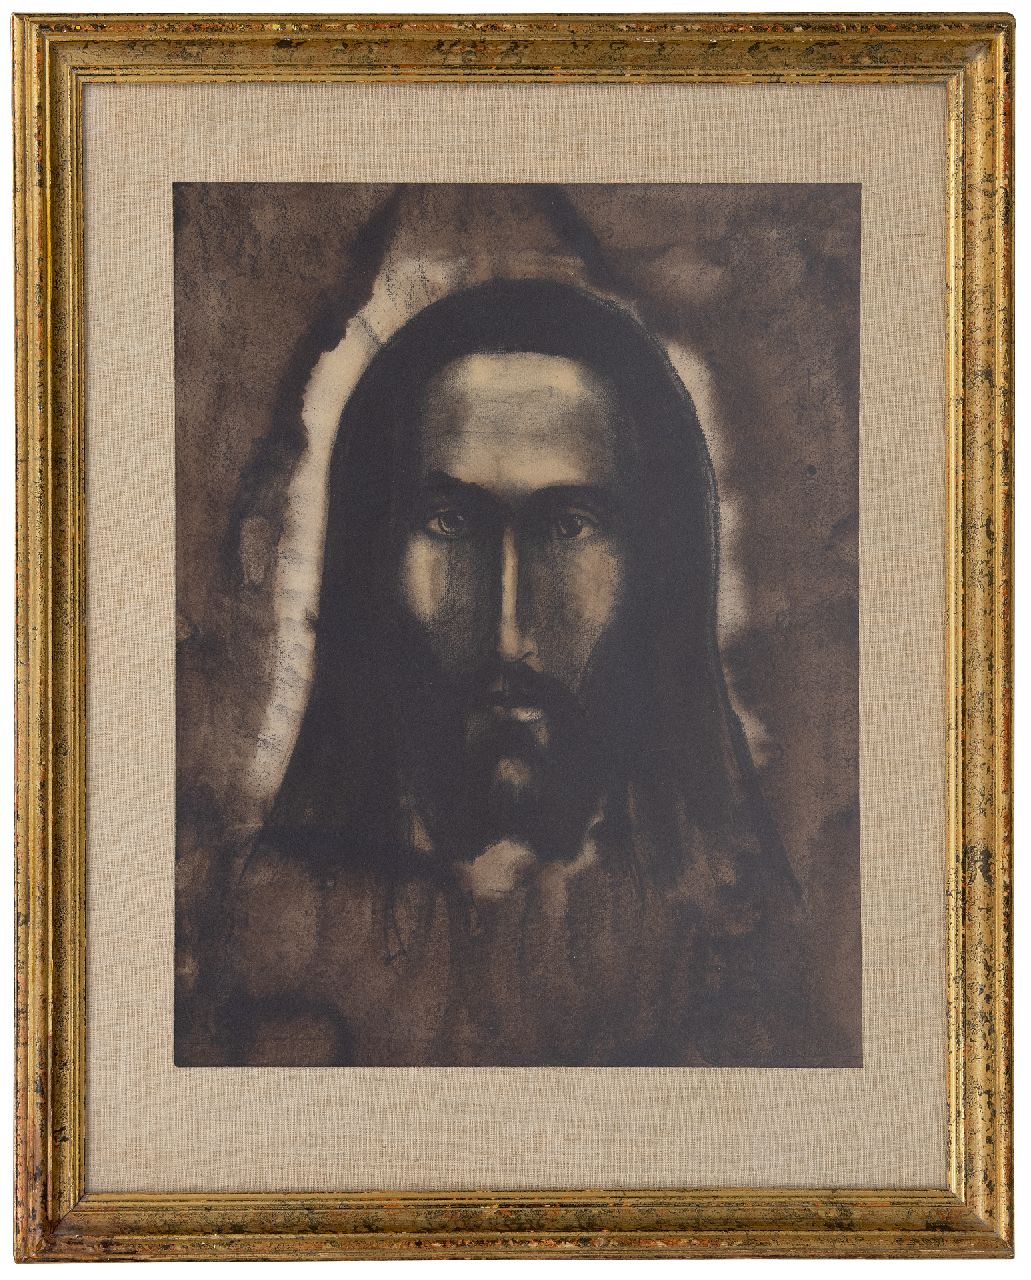 Schelfhout L.  | Lodewijk Schelfhout | Watercolours and drawings offered for sale | Tête de Christ, Indian ink, chalk and watercolour on paper 50.0 x 39.8 cm, signed l.r. and dated 1912